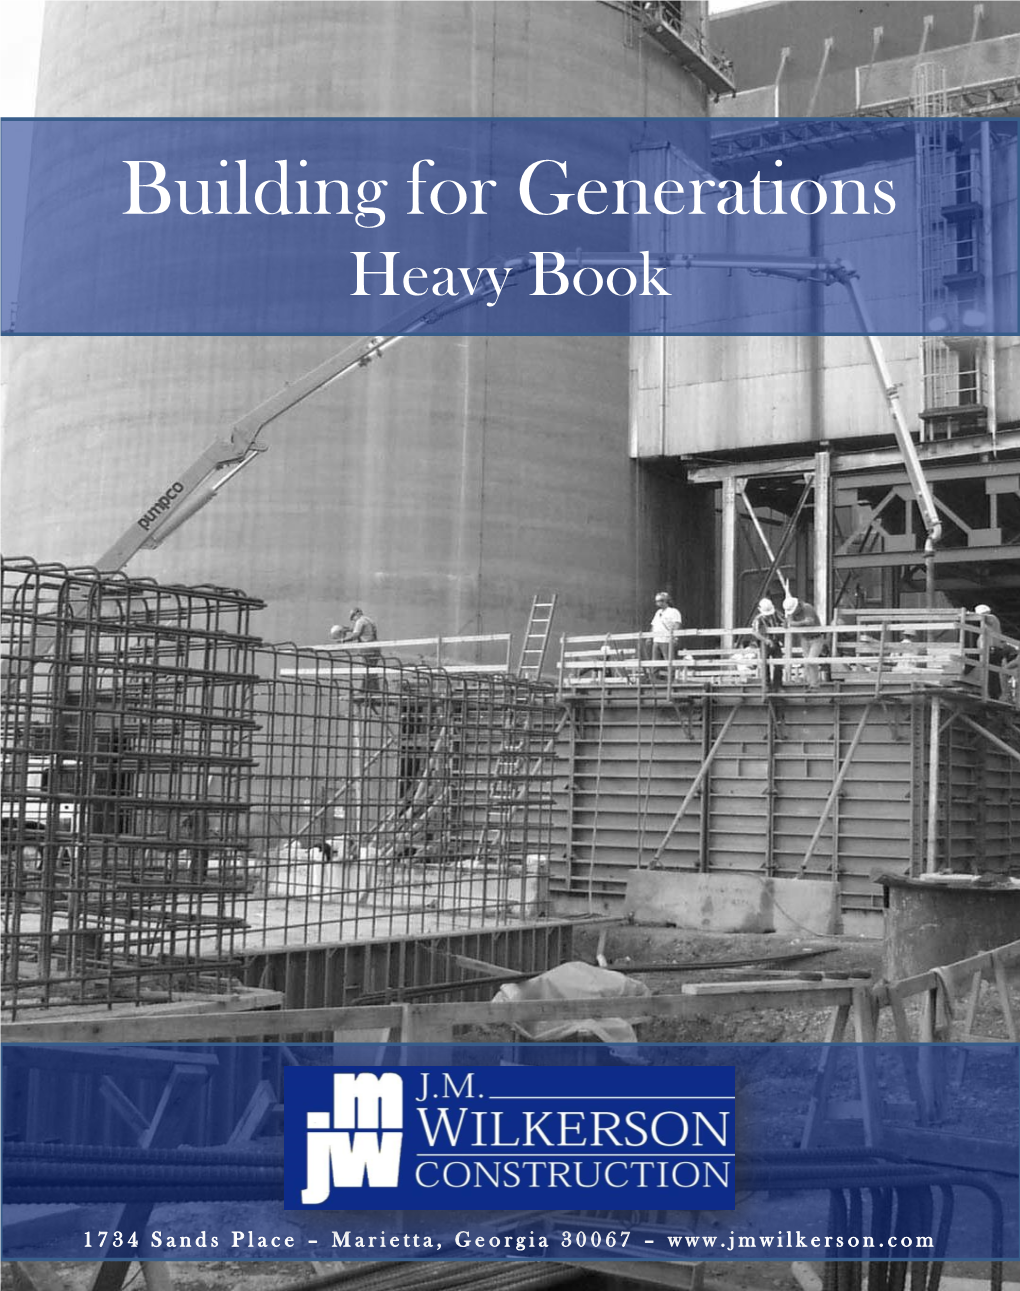 Building for Generations Heavy Book